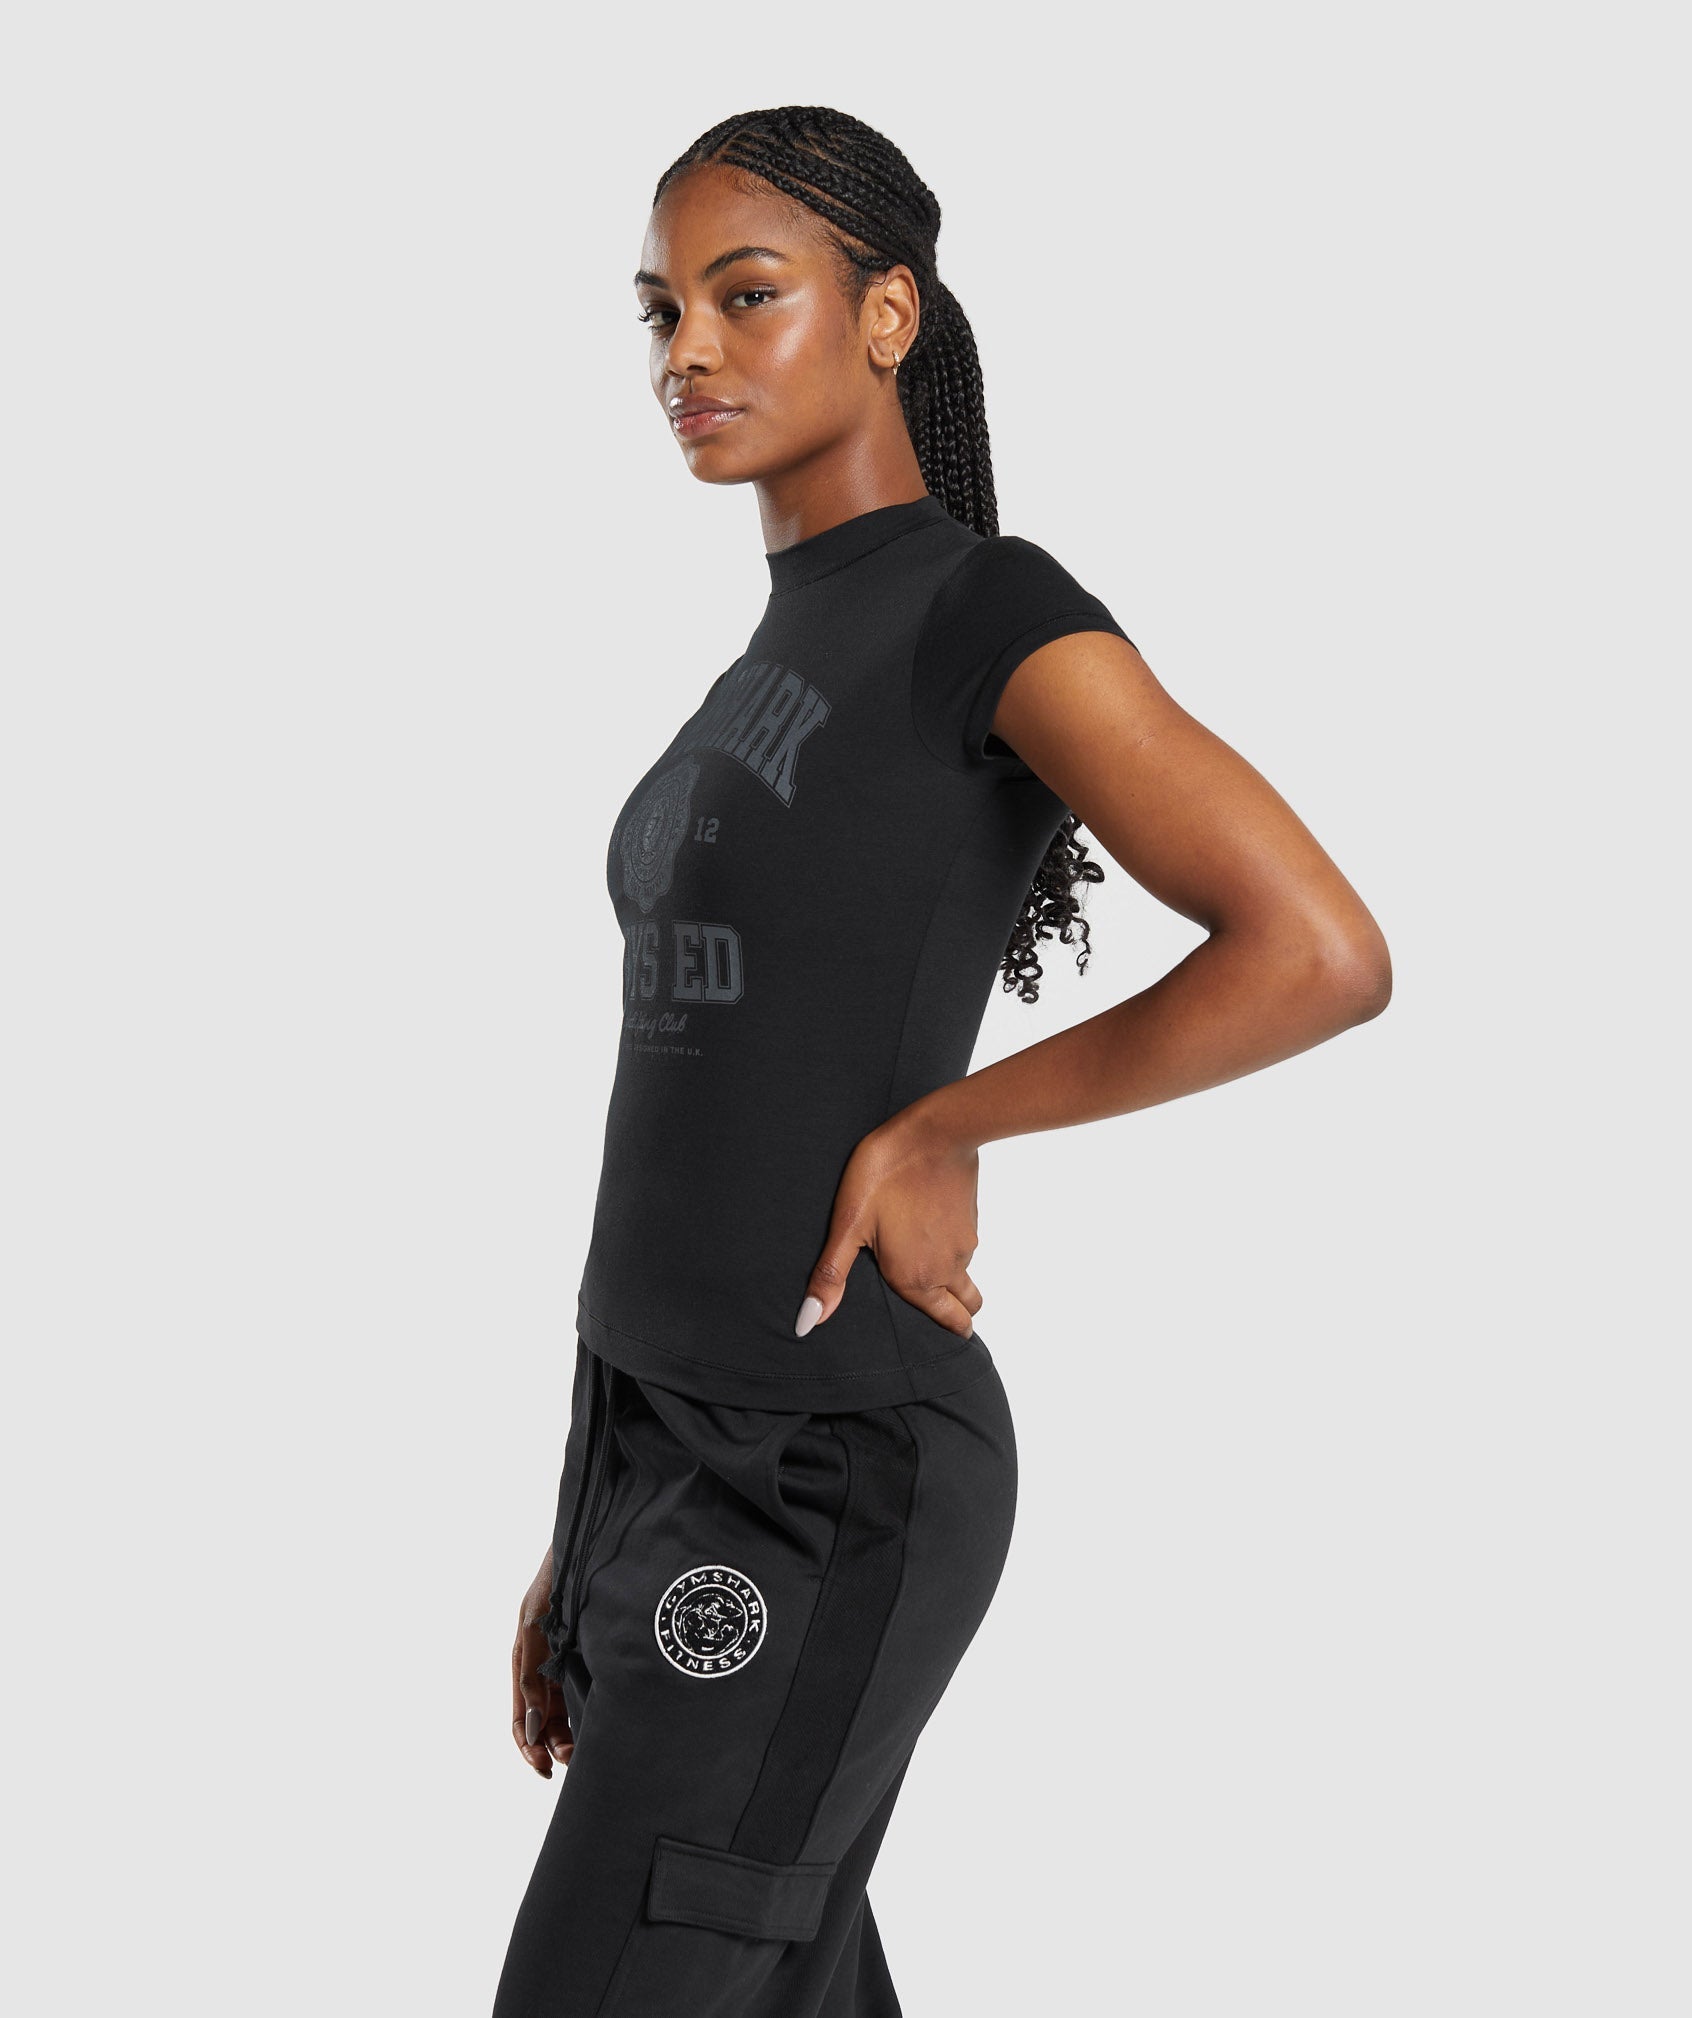 Phys Ed Graphic Body Fit T-Shirt in Black - view 4